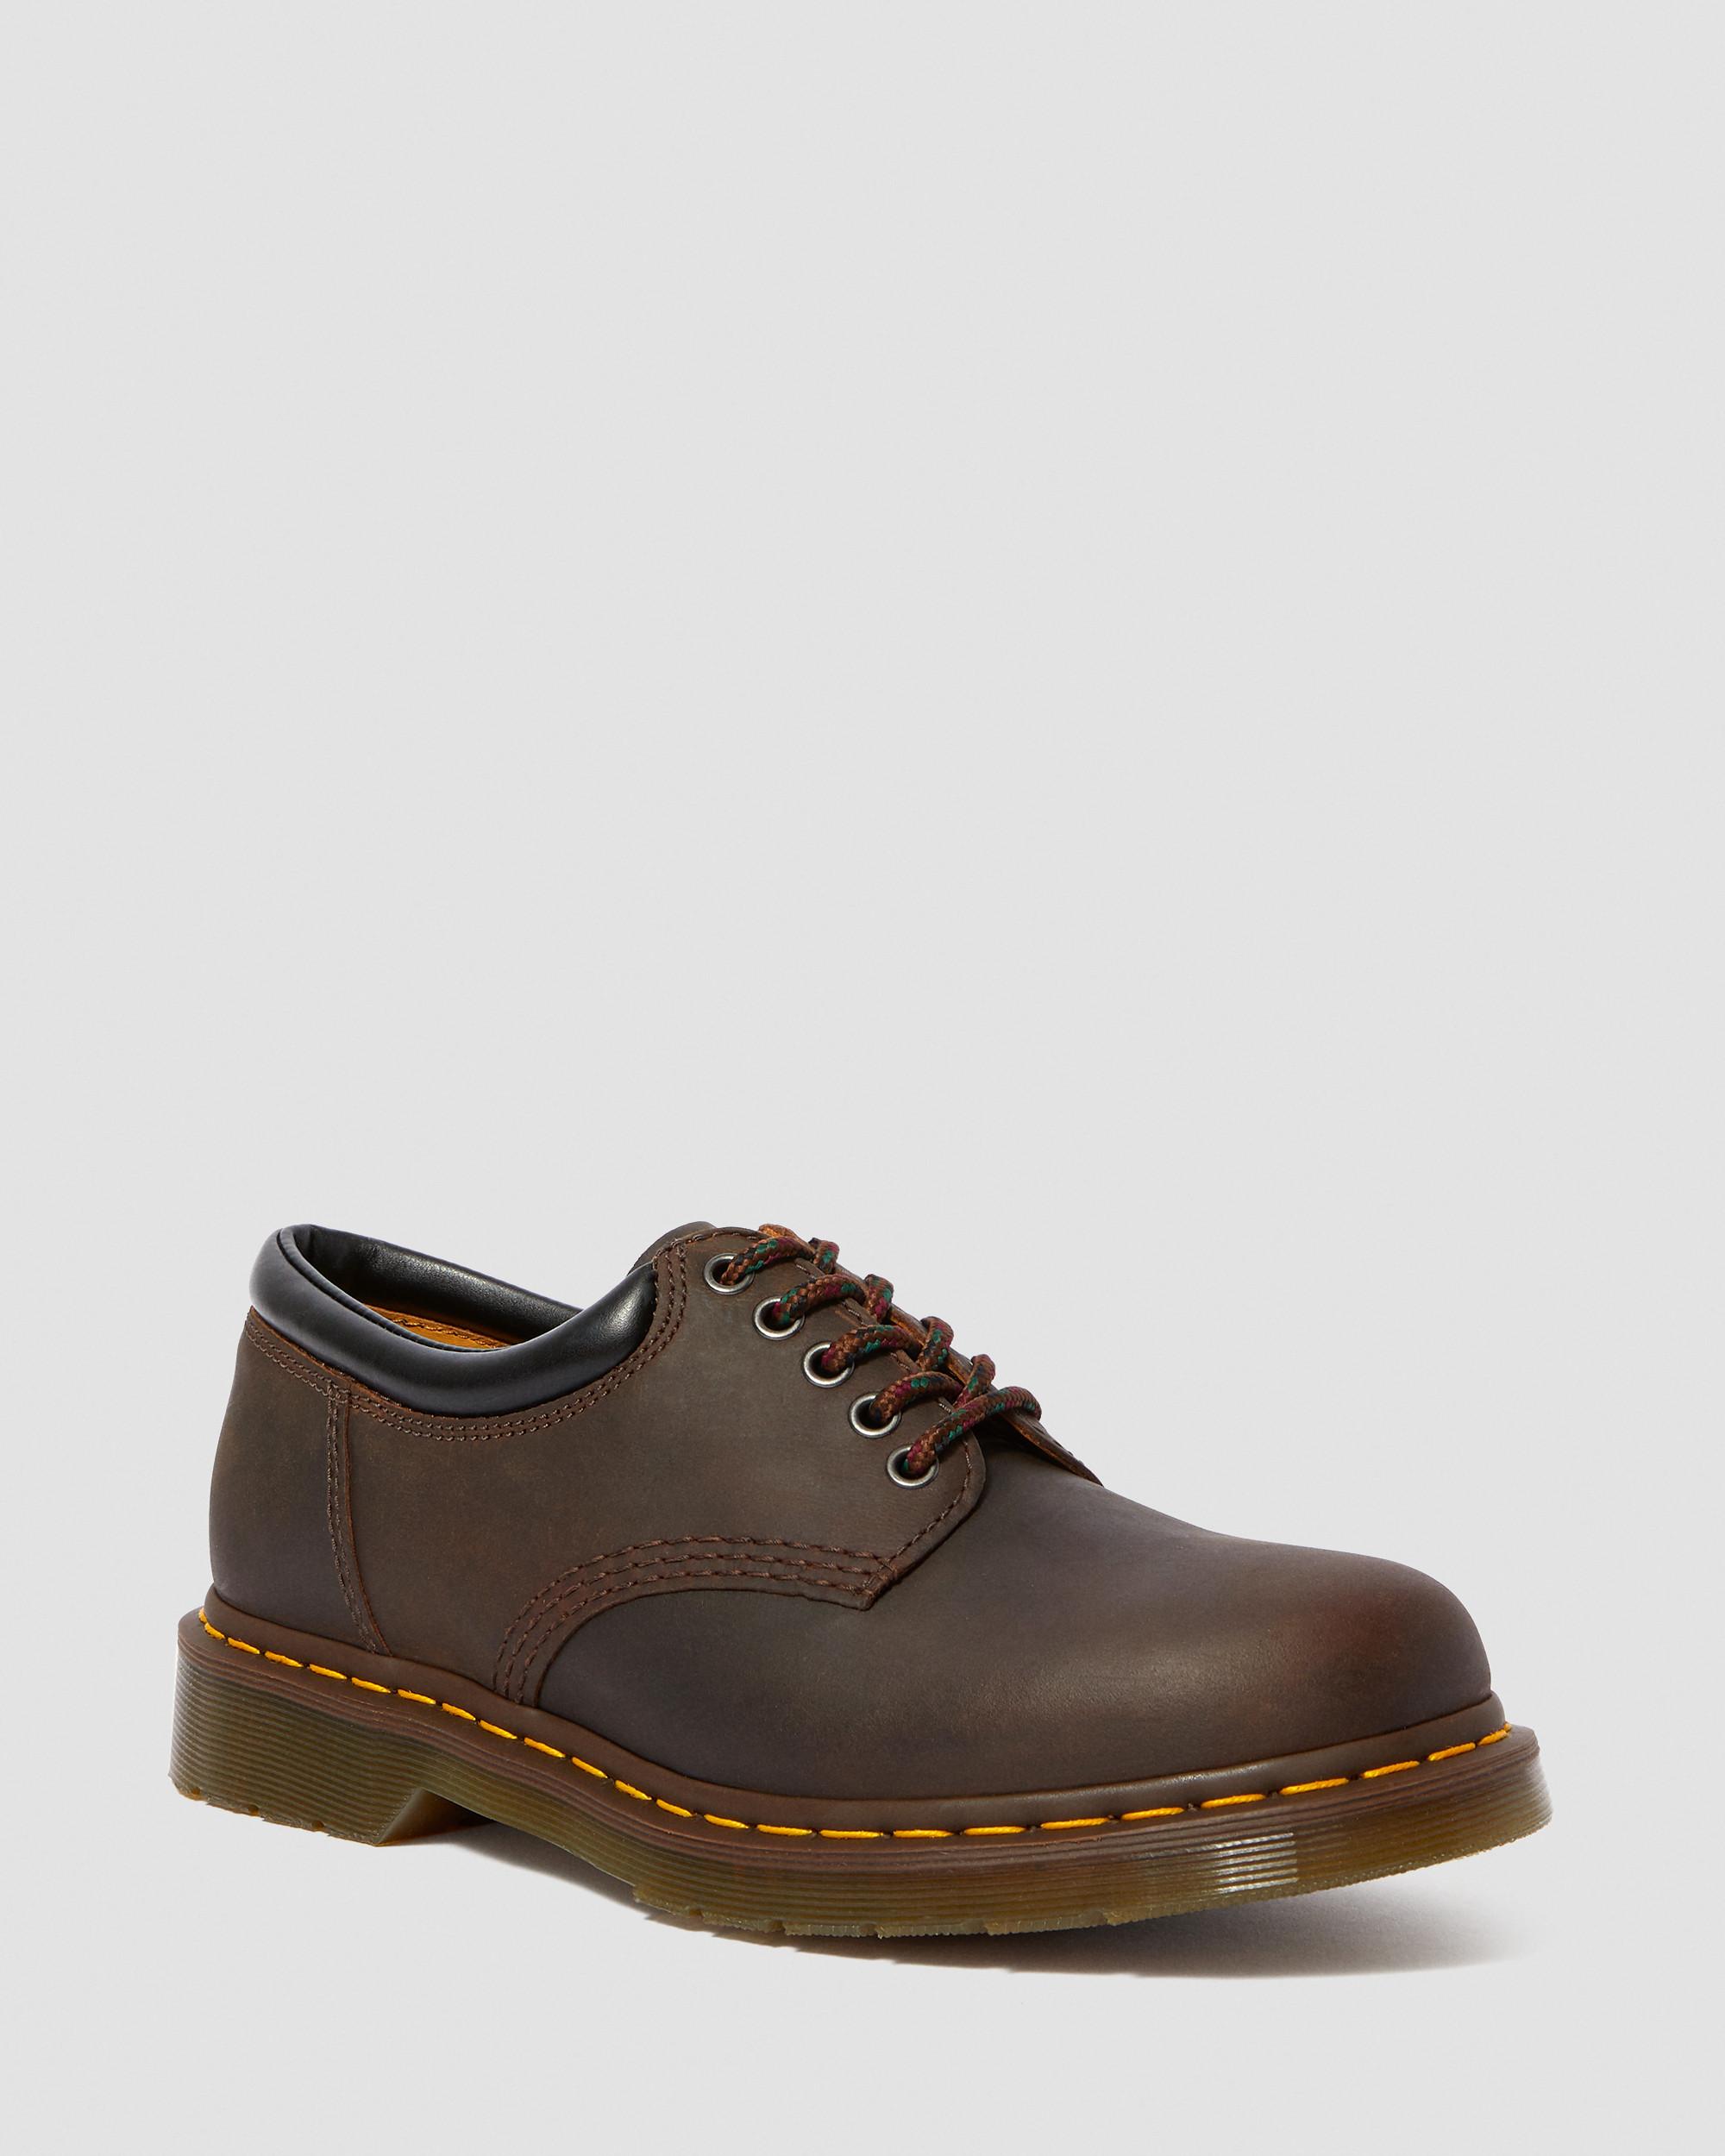 8053 Crazy Horse Leather Casual Shoes in Dark Brown